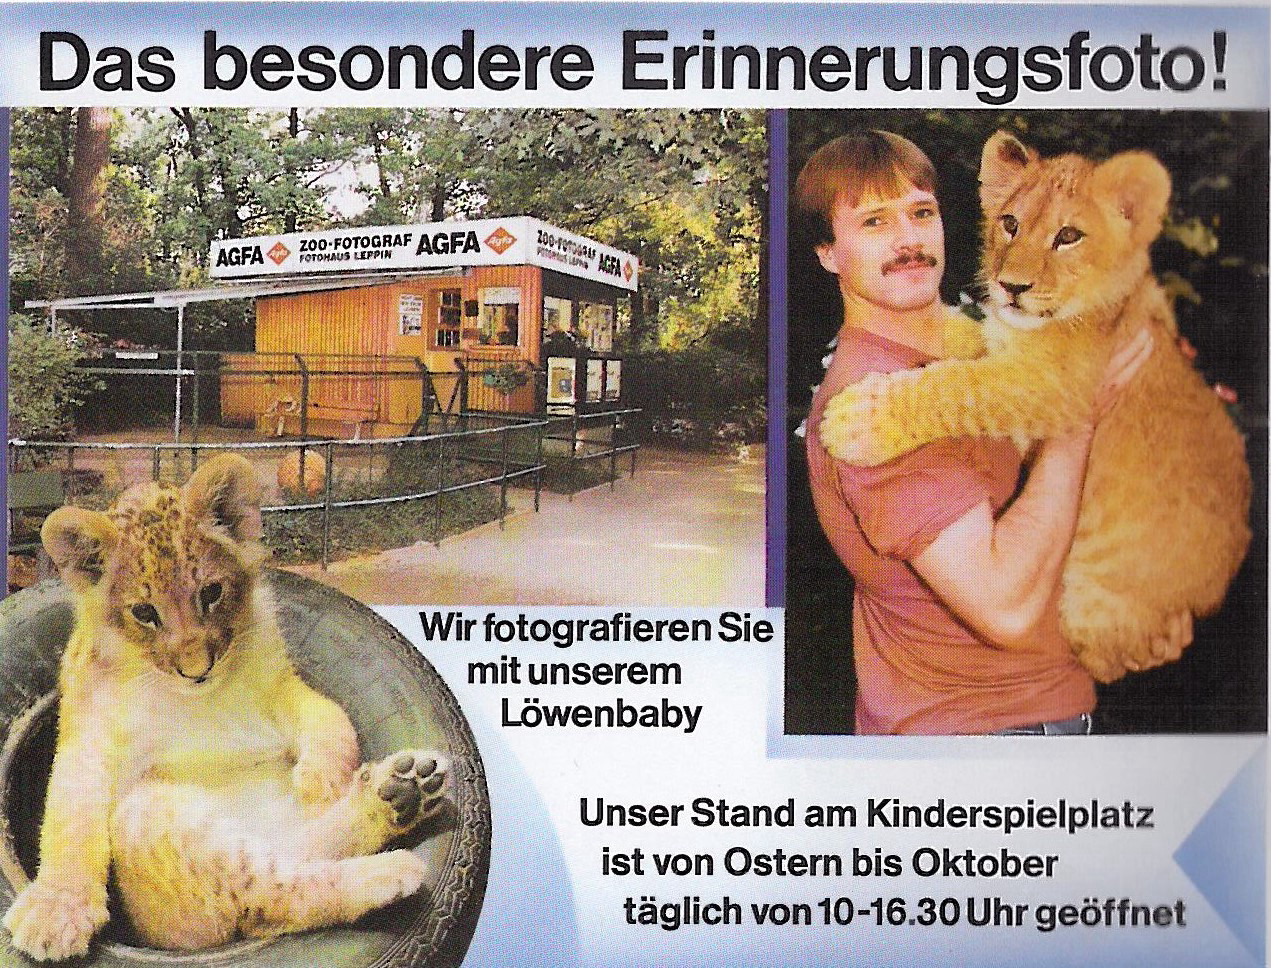 Advertisement for the zoo photographer in the 1992 guide to Berlin Zoo. There are three colour photographs: in the top left a picture of the booth with the bench, in the bottom left a lion cub in a tyre, and on the right a man standing with a young lion in his arms.